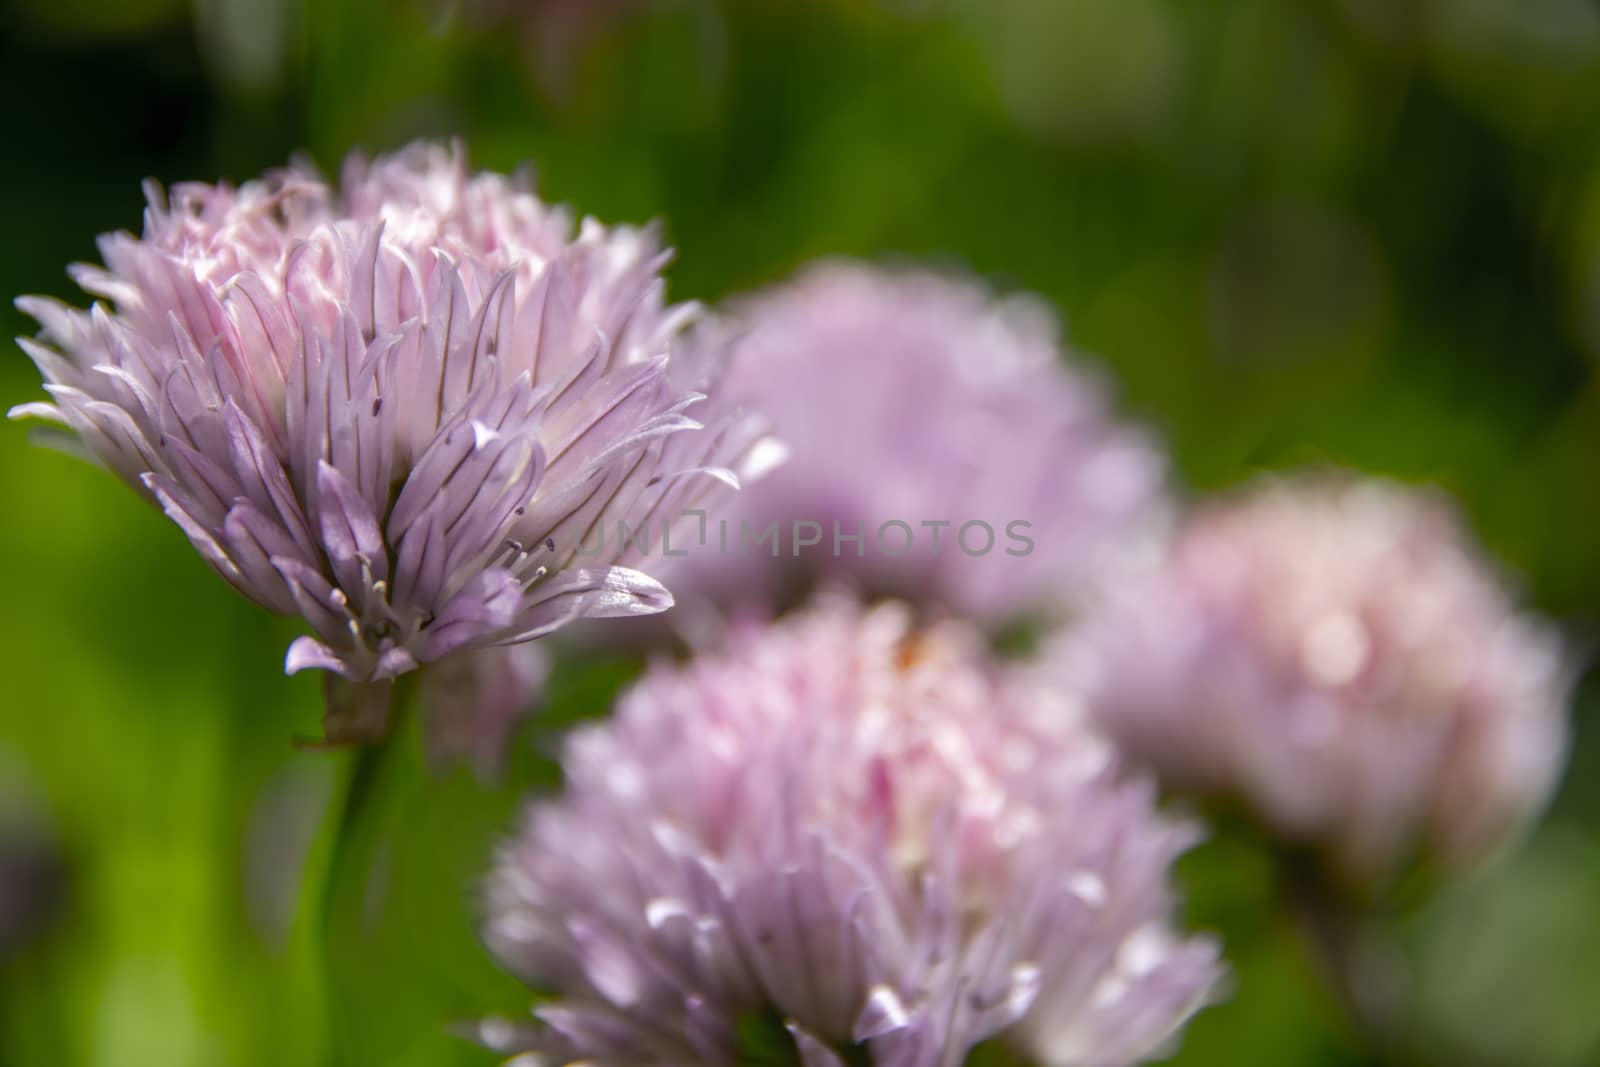 Close-up and detail of purple chive flowering buds by kb79